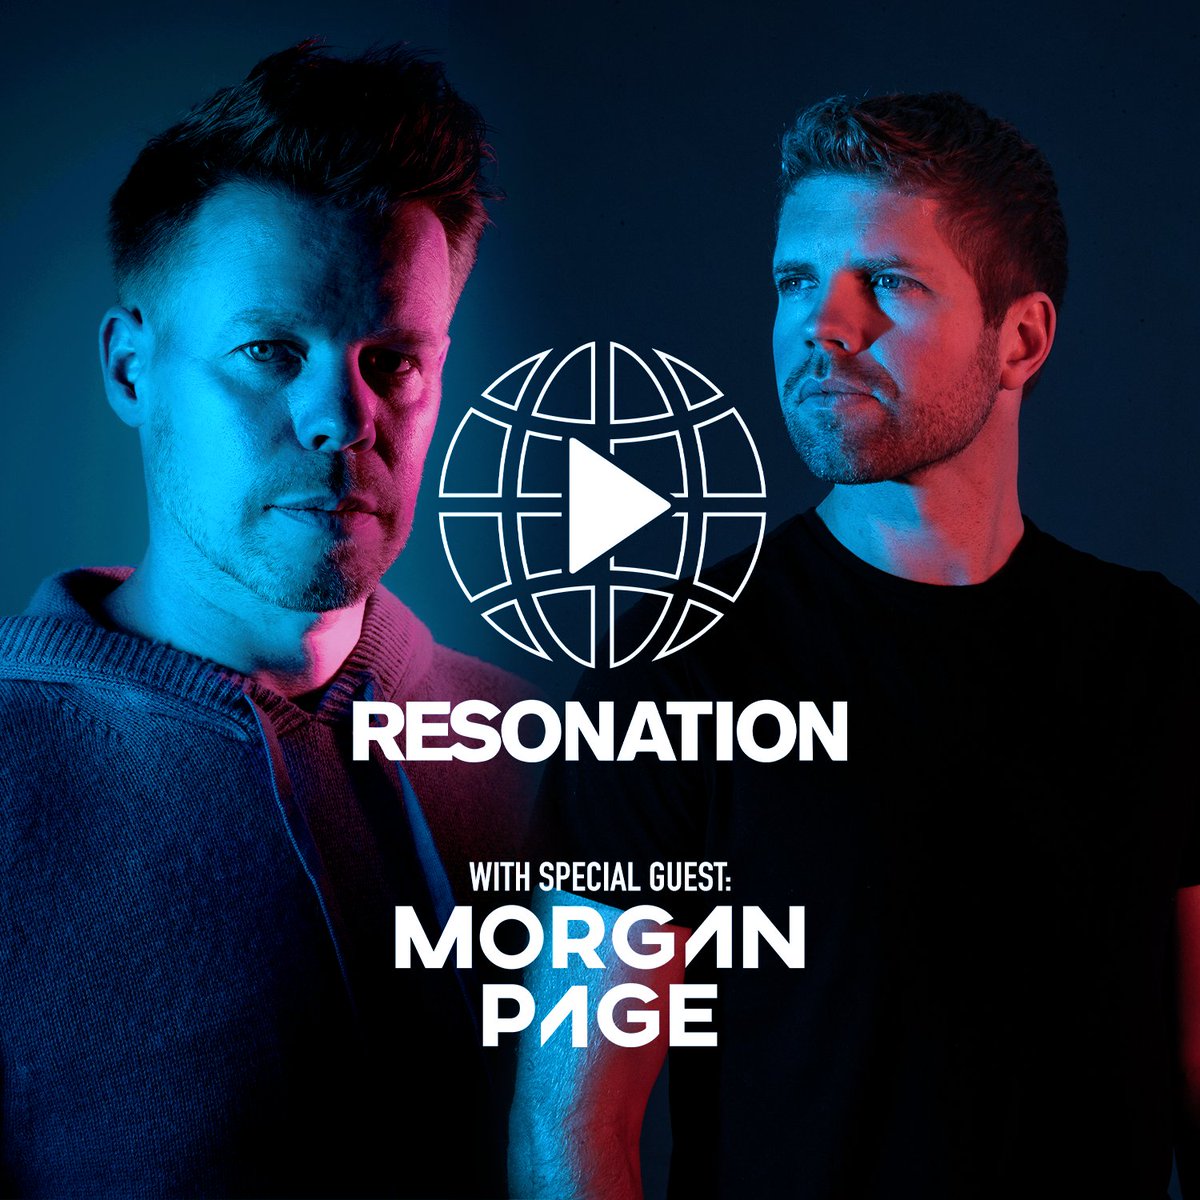 Coming up soon is a special guest mix by @morganpage on @ResonationRadio, all the way from his studio in Los Angeles! Tune in now: youtu.be/nTQTEiUDtGg #RES067